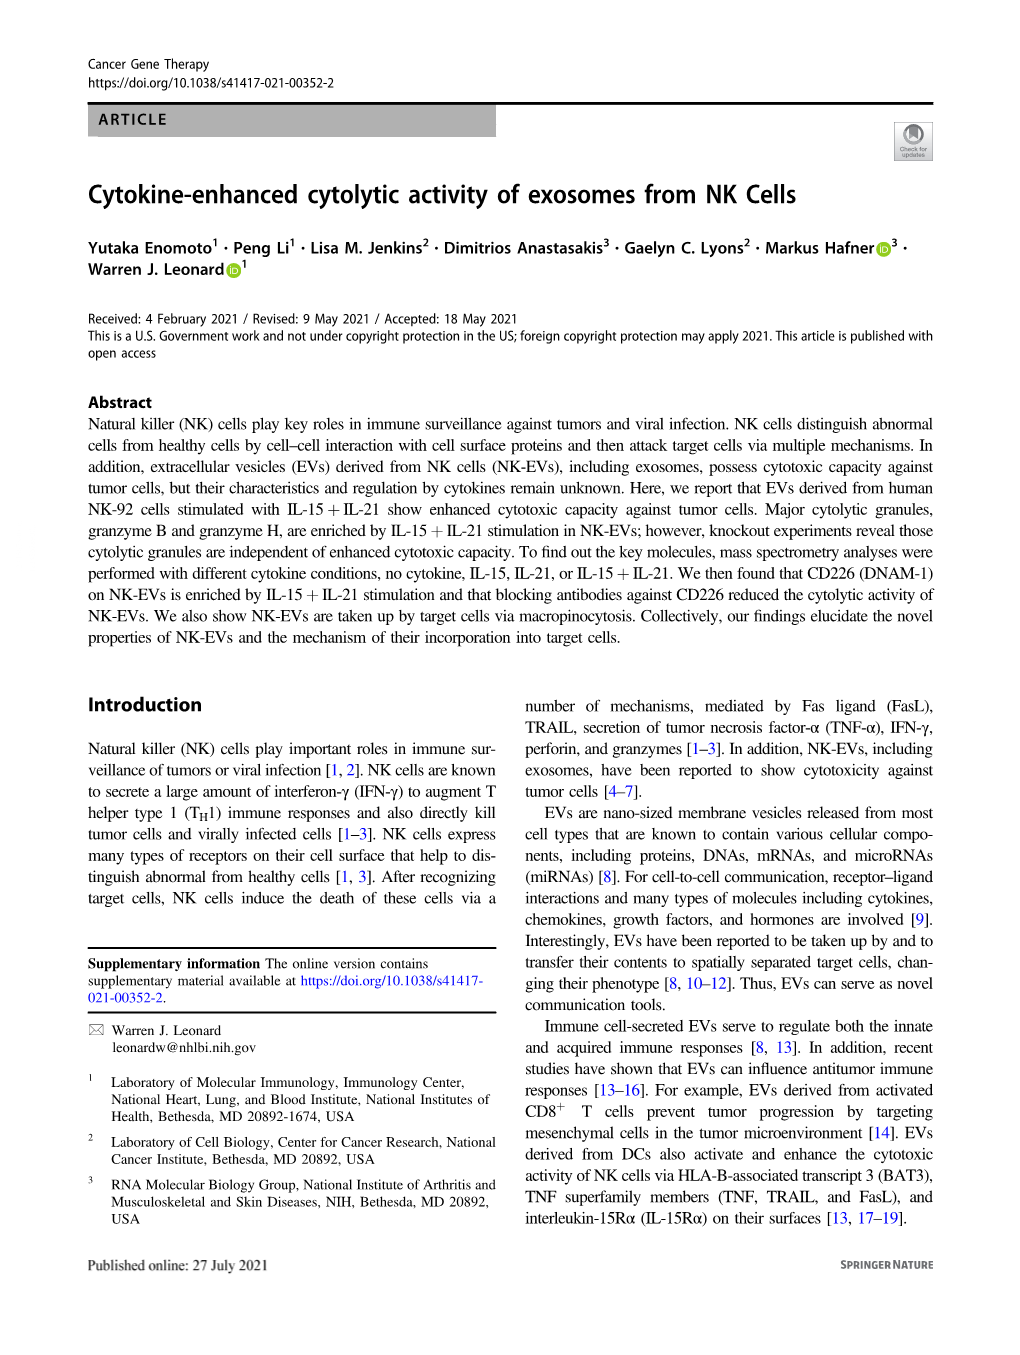 Cytokine-Enhanced Cytolytic Activity of Exosomes from NK Cells